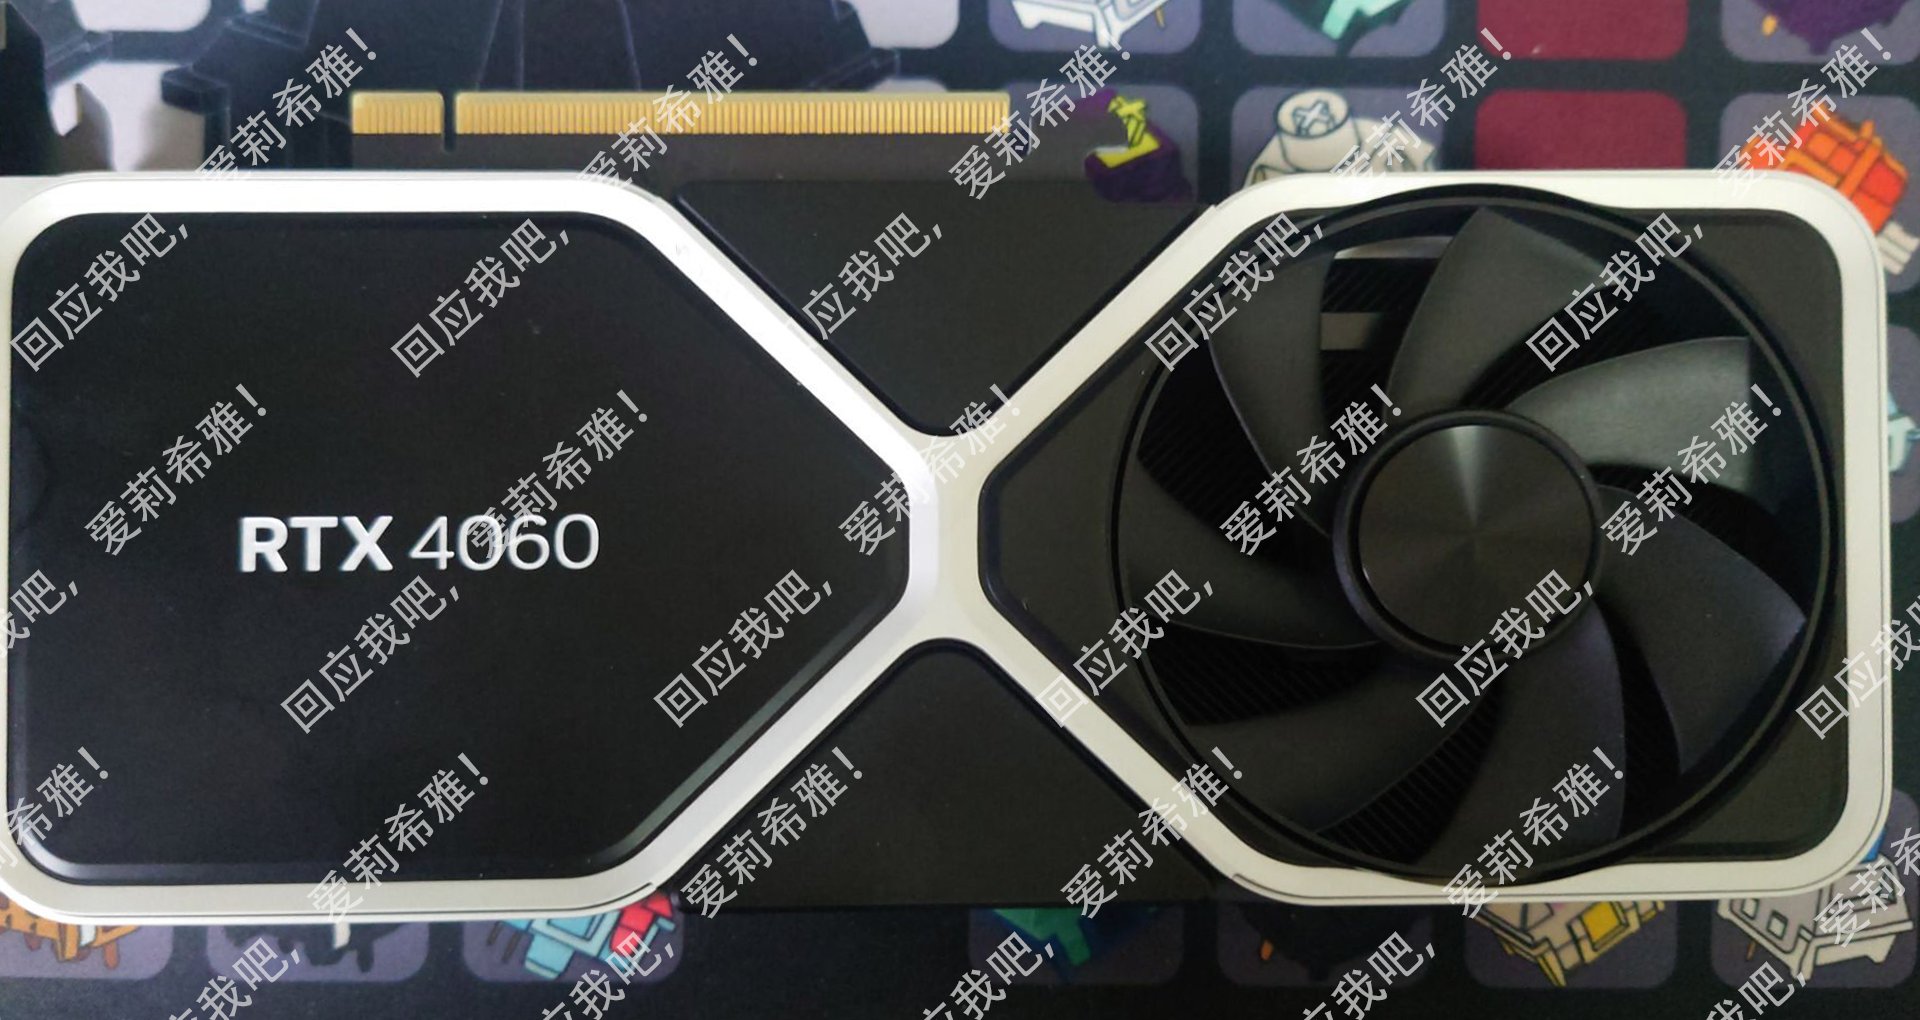 NVIDIA GeForce RTX 4060 (Ti) Founders Edition has been pictured as well 